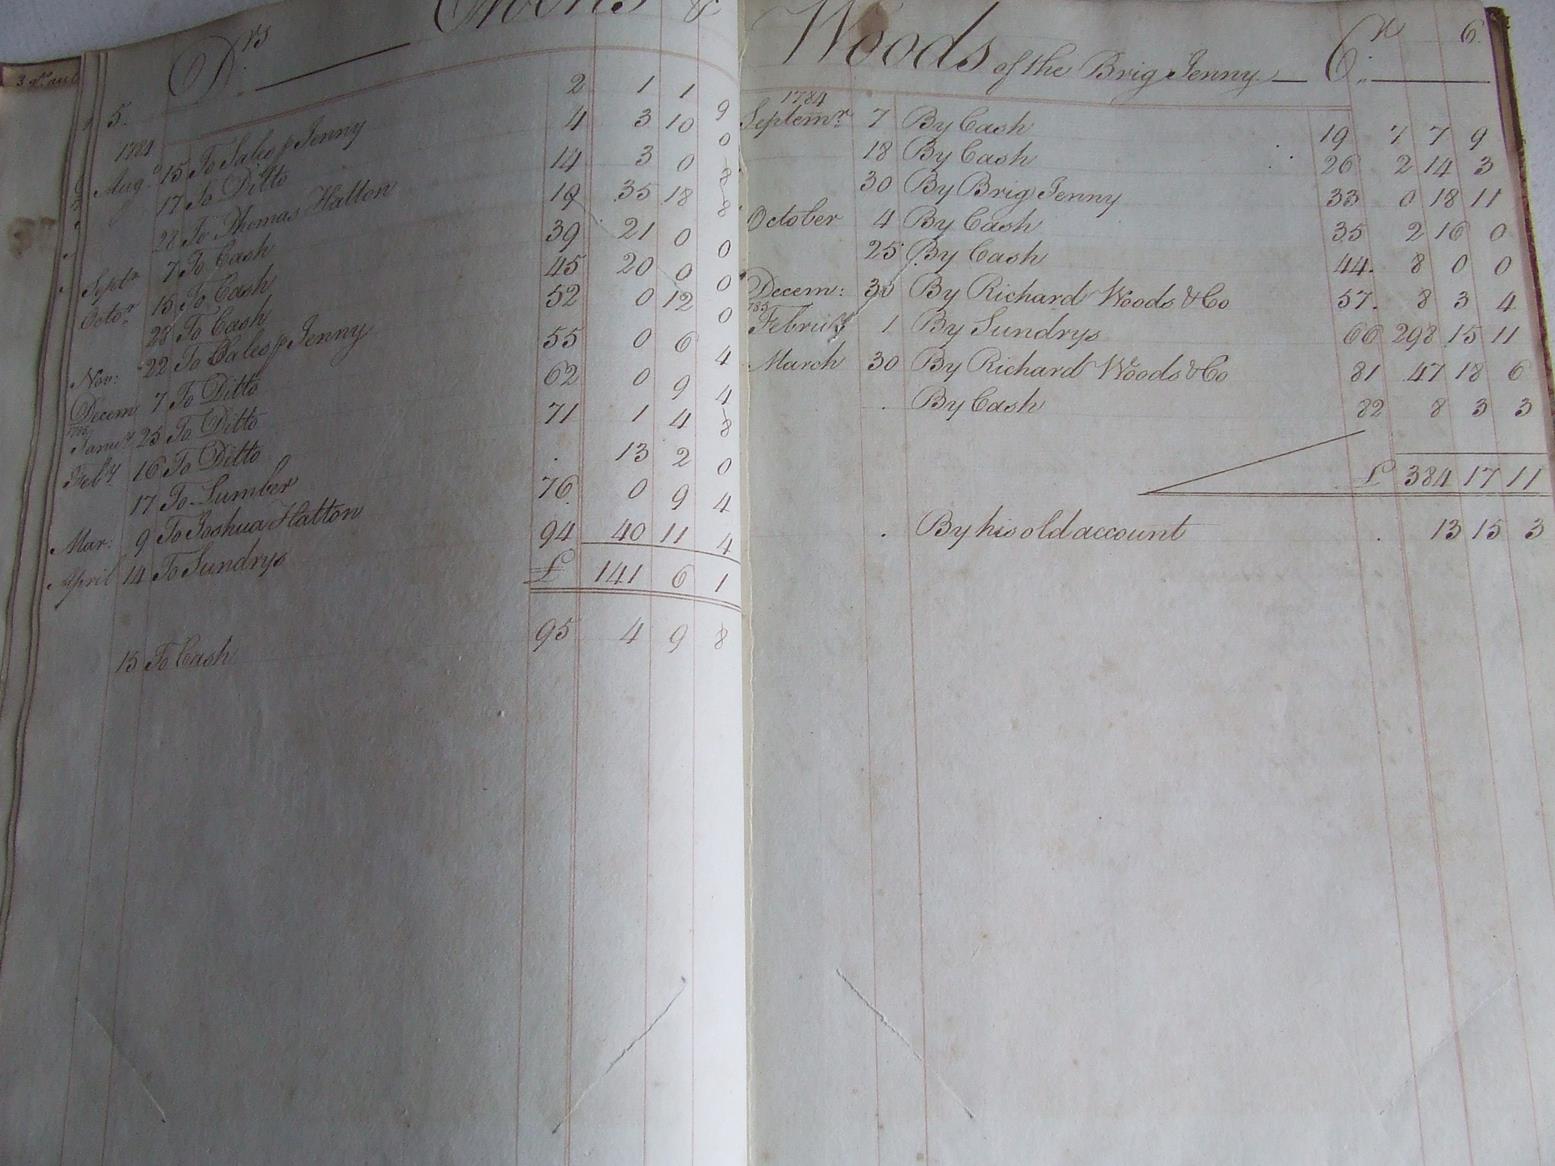 1784 / 1785 Accounts Journal relating to the brig 'Jenny' [of Liverpool?]